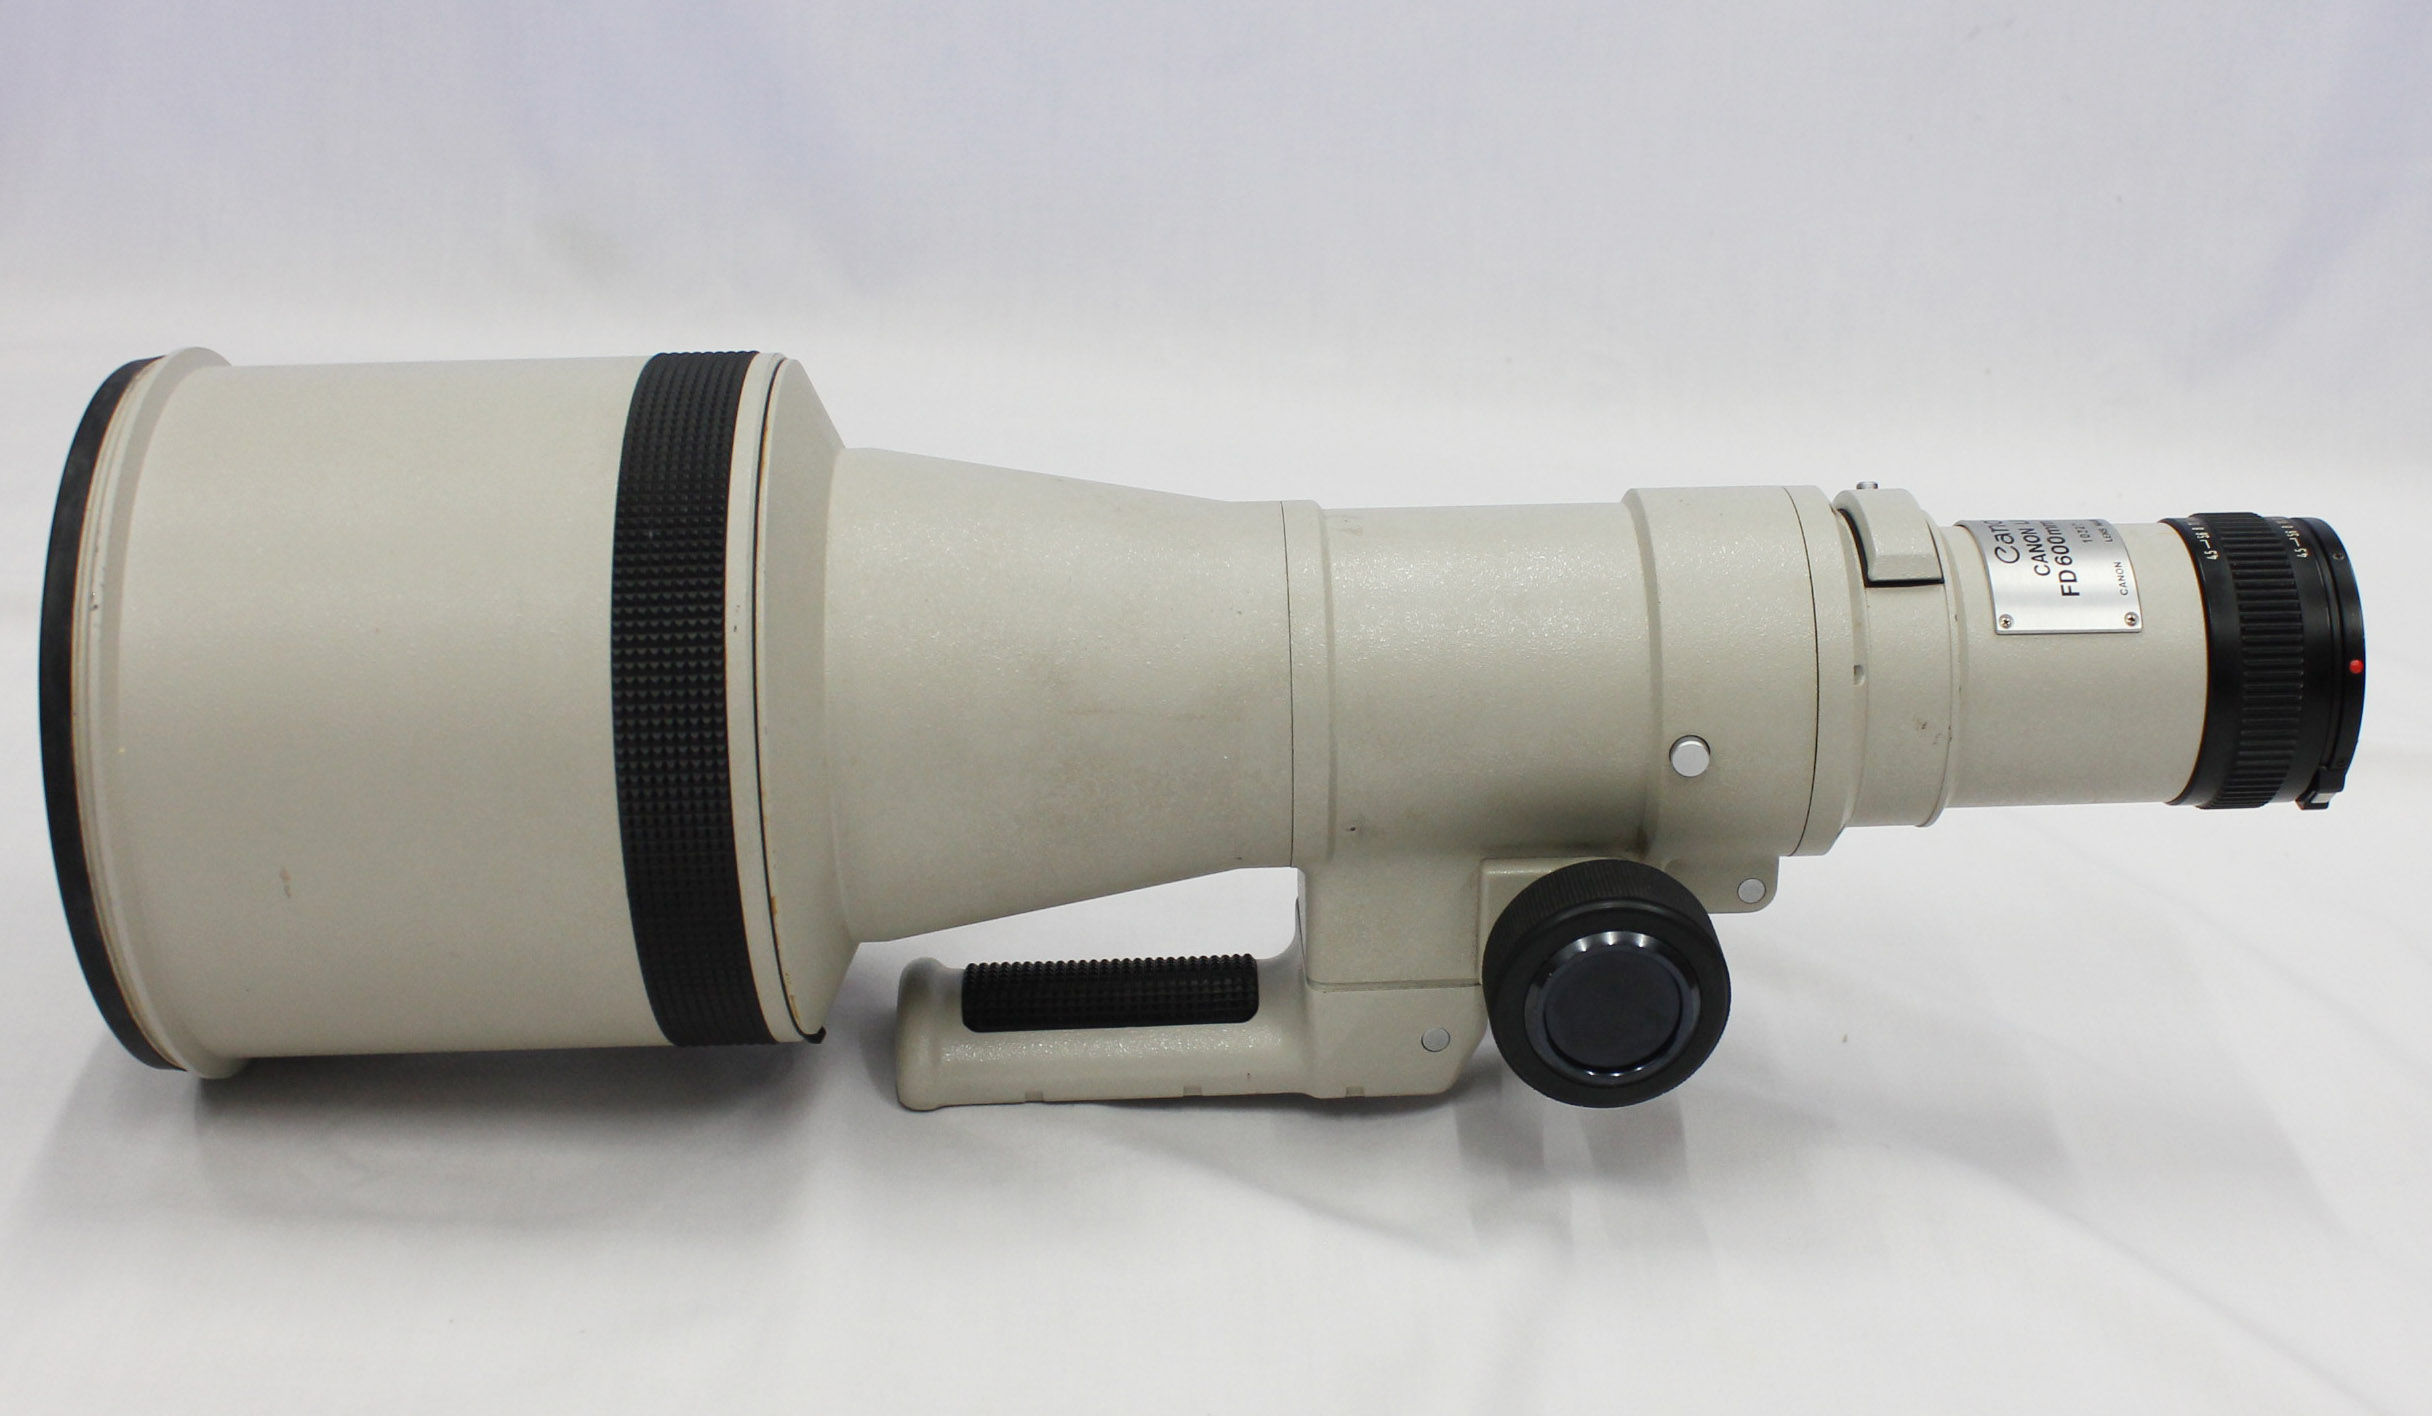 Canon New FD NFD 600mm F/4.5 MF Telephoto Lens from Japan (C1878 